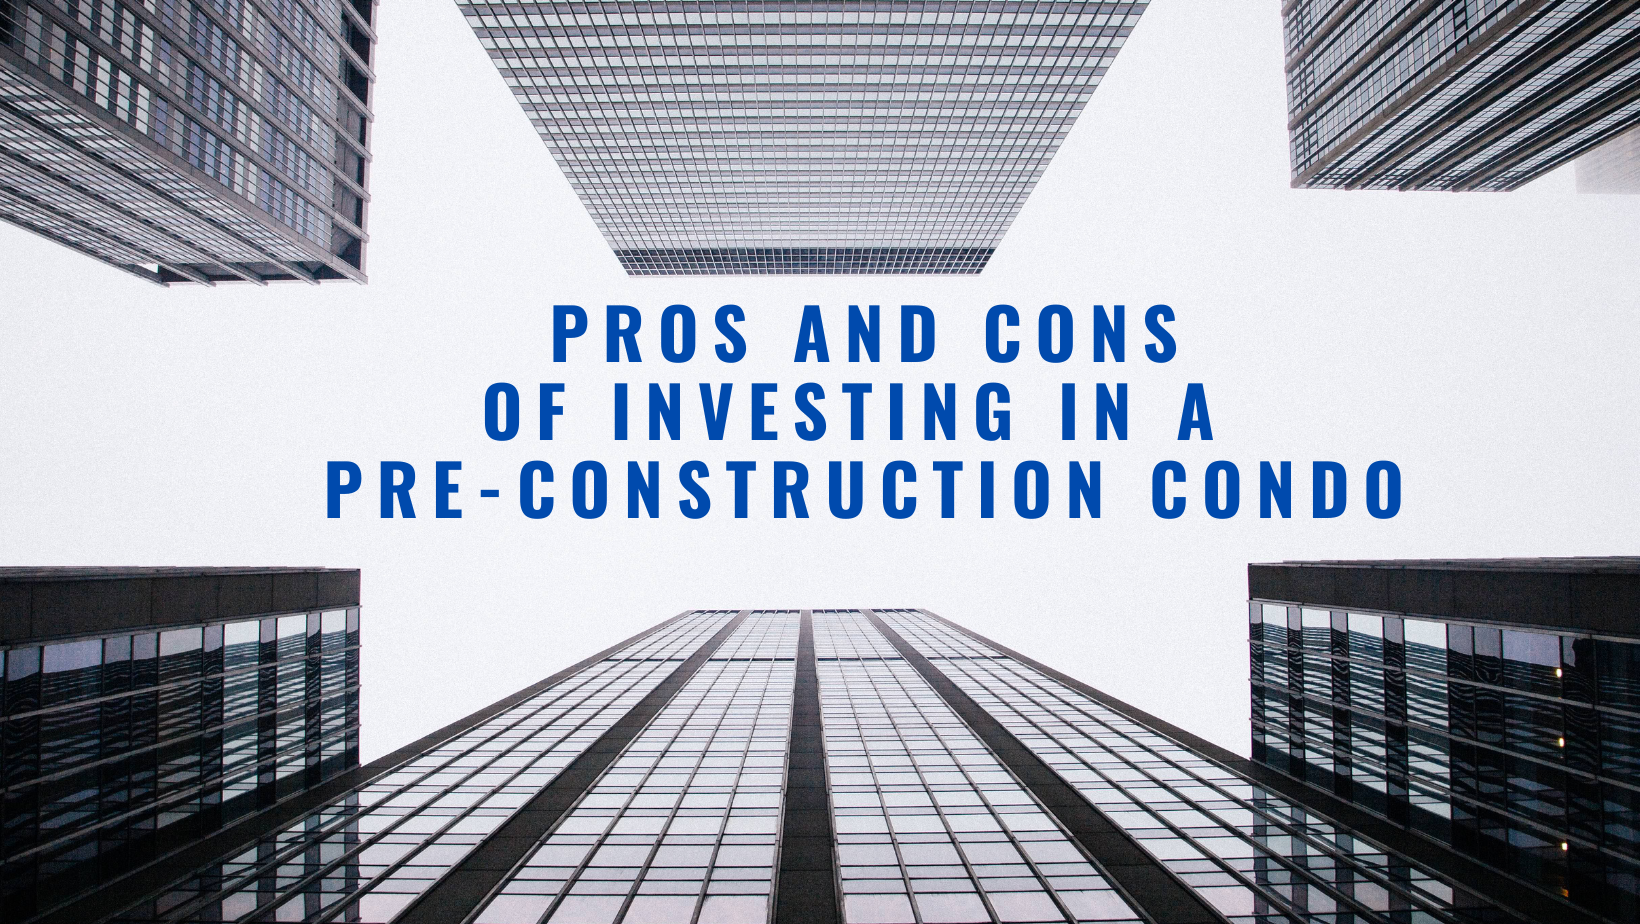 Pros and Cons of investing in a pre-construction condo